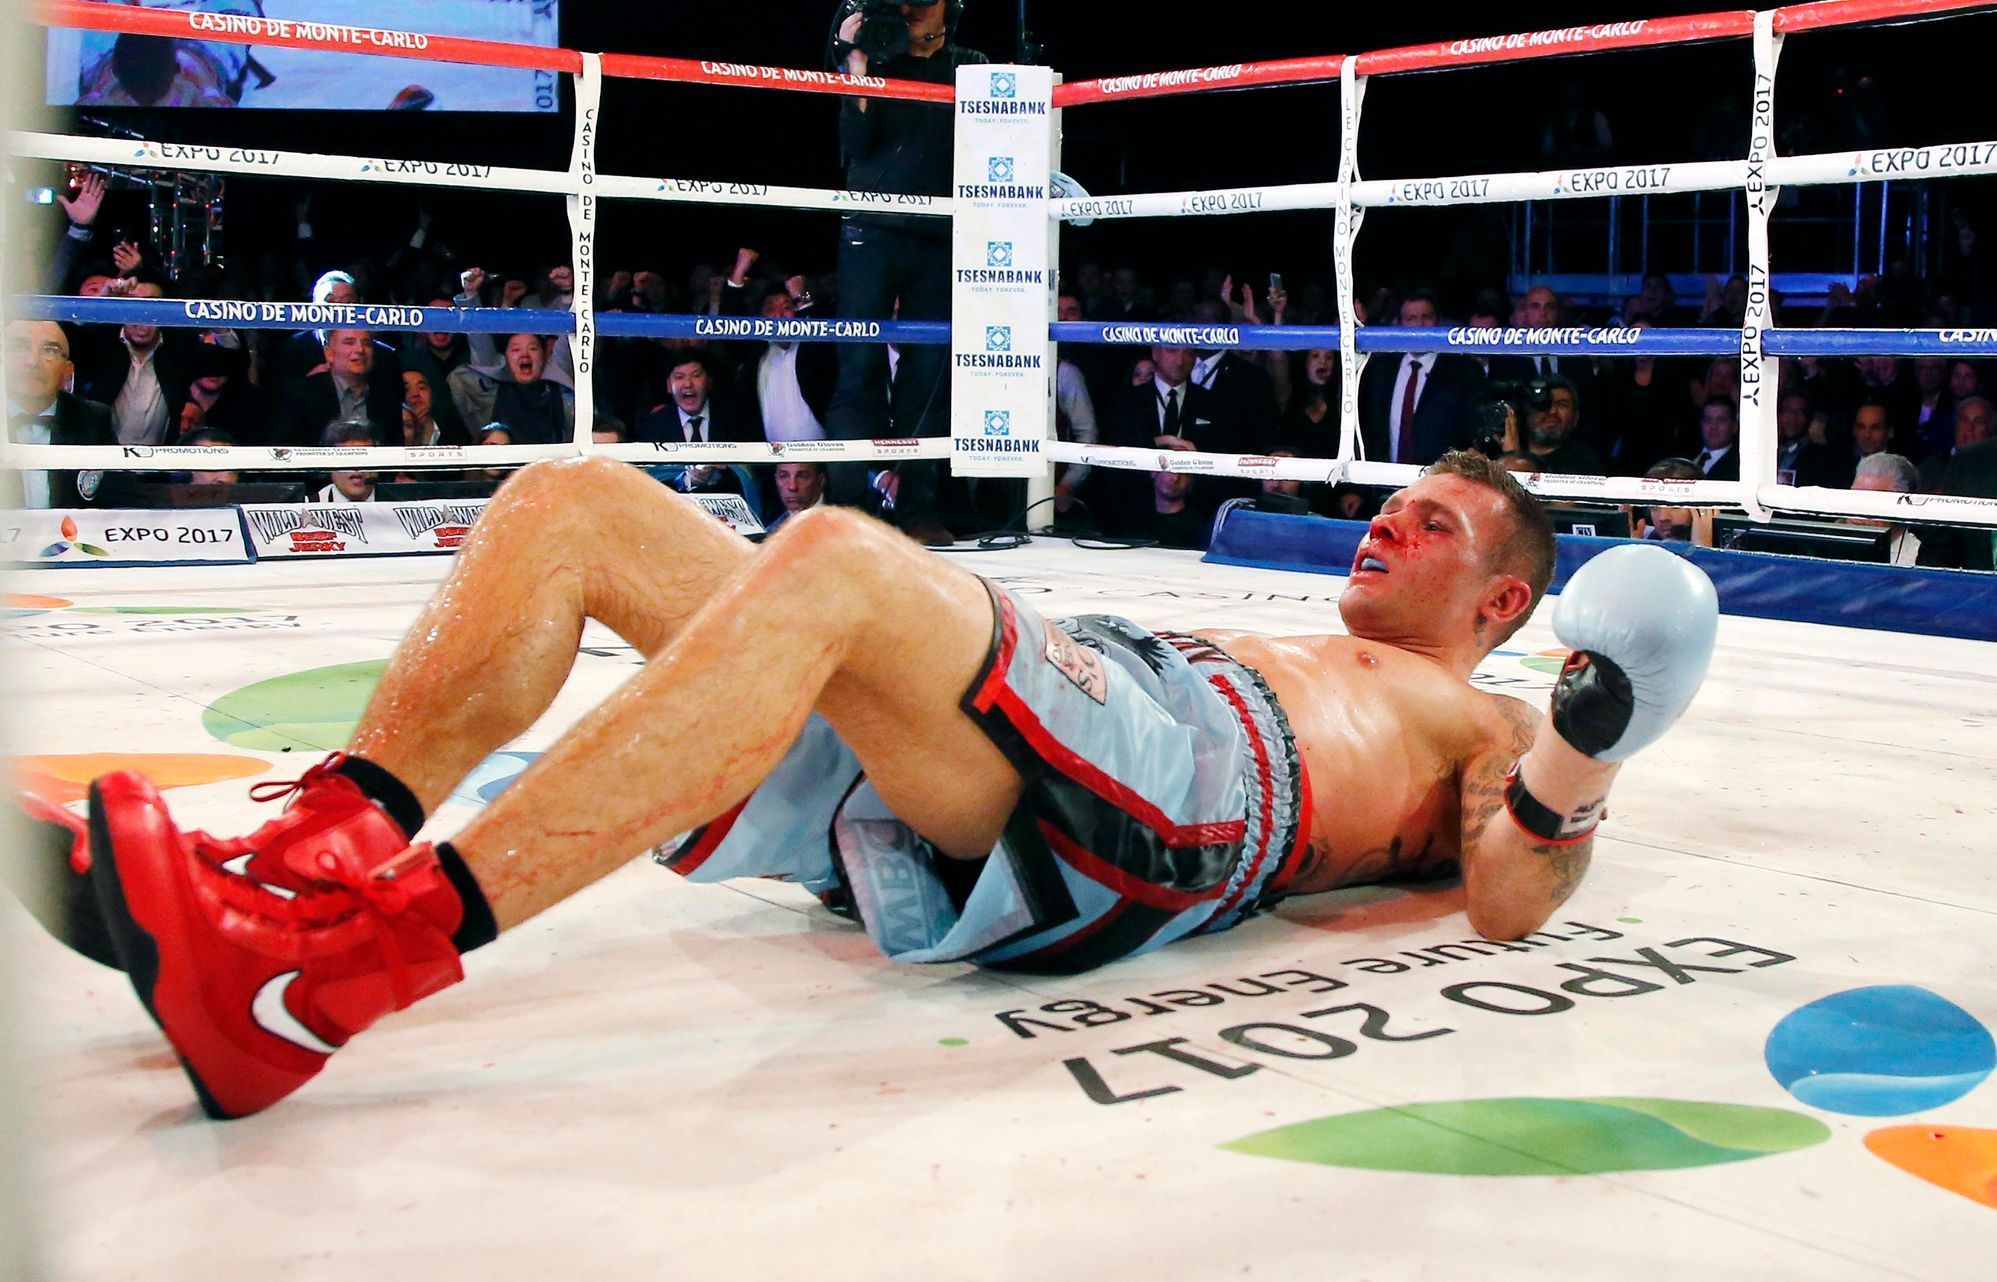 Murray of England after being knocked down by World champion Golovkin of Kazakhstan during their WBA-WBC-IBO Middleweight World Championship fight in Monte Carlo